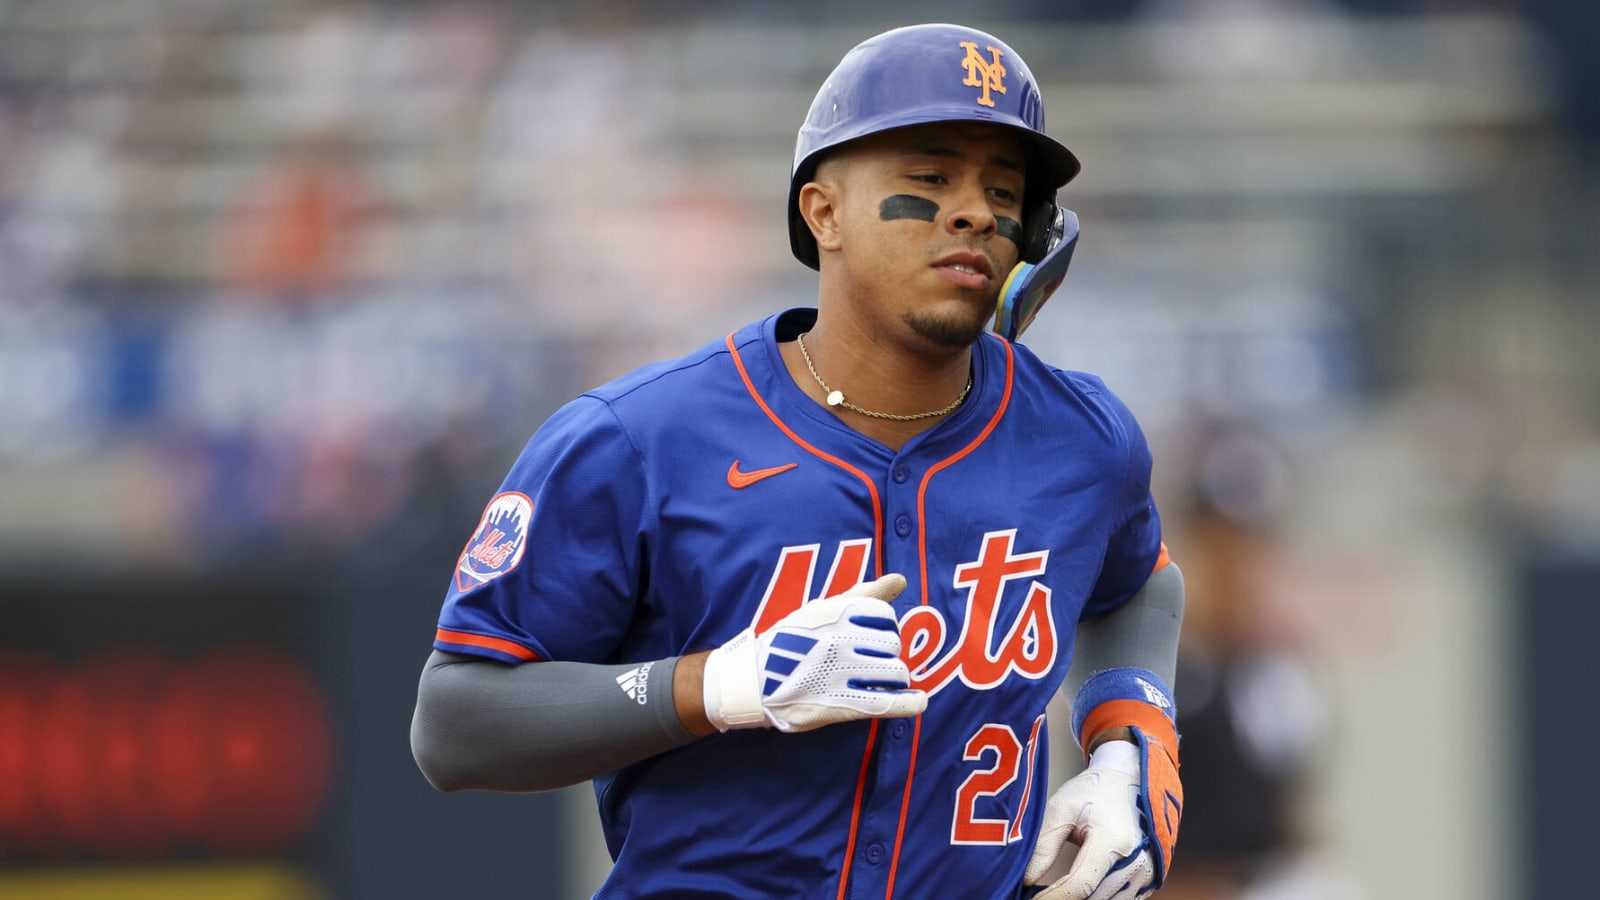 Mets prospects appear to clown club on social media